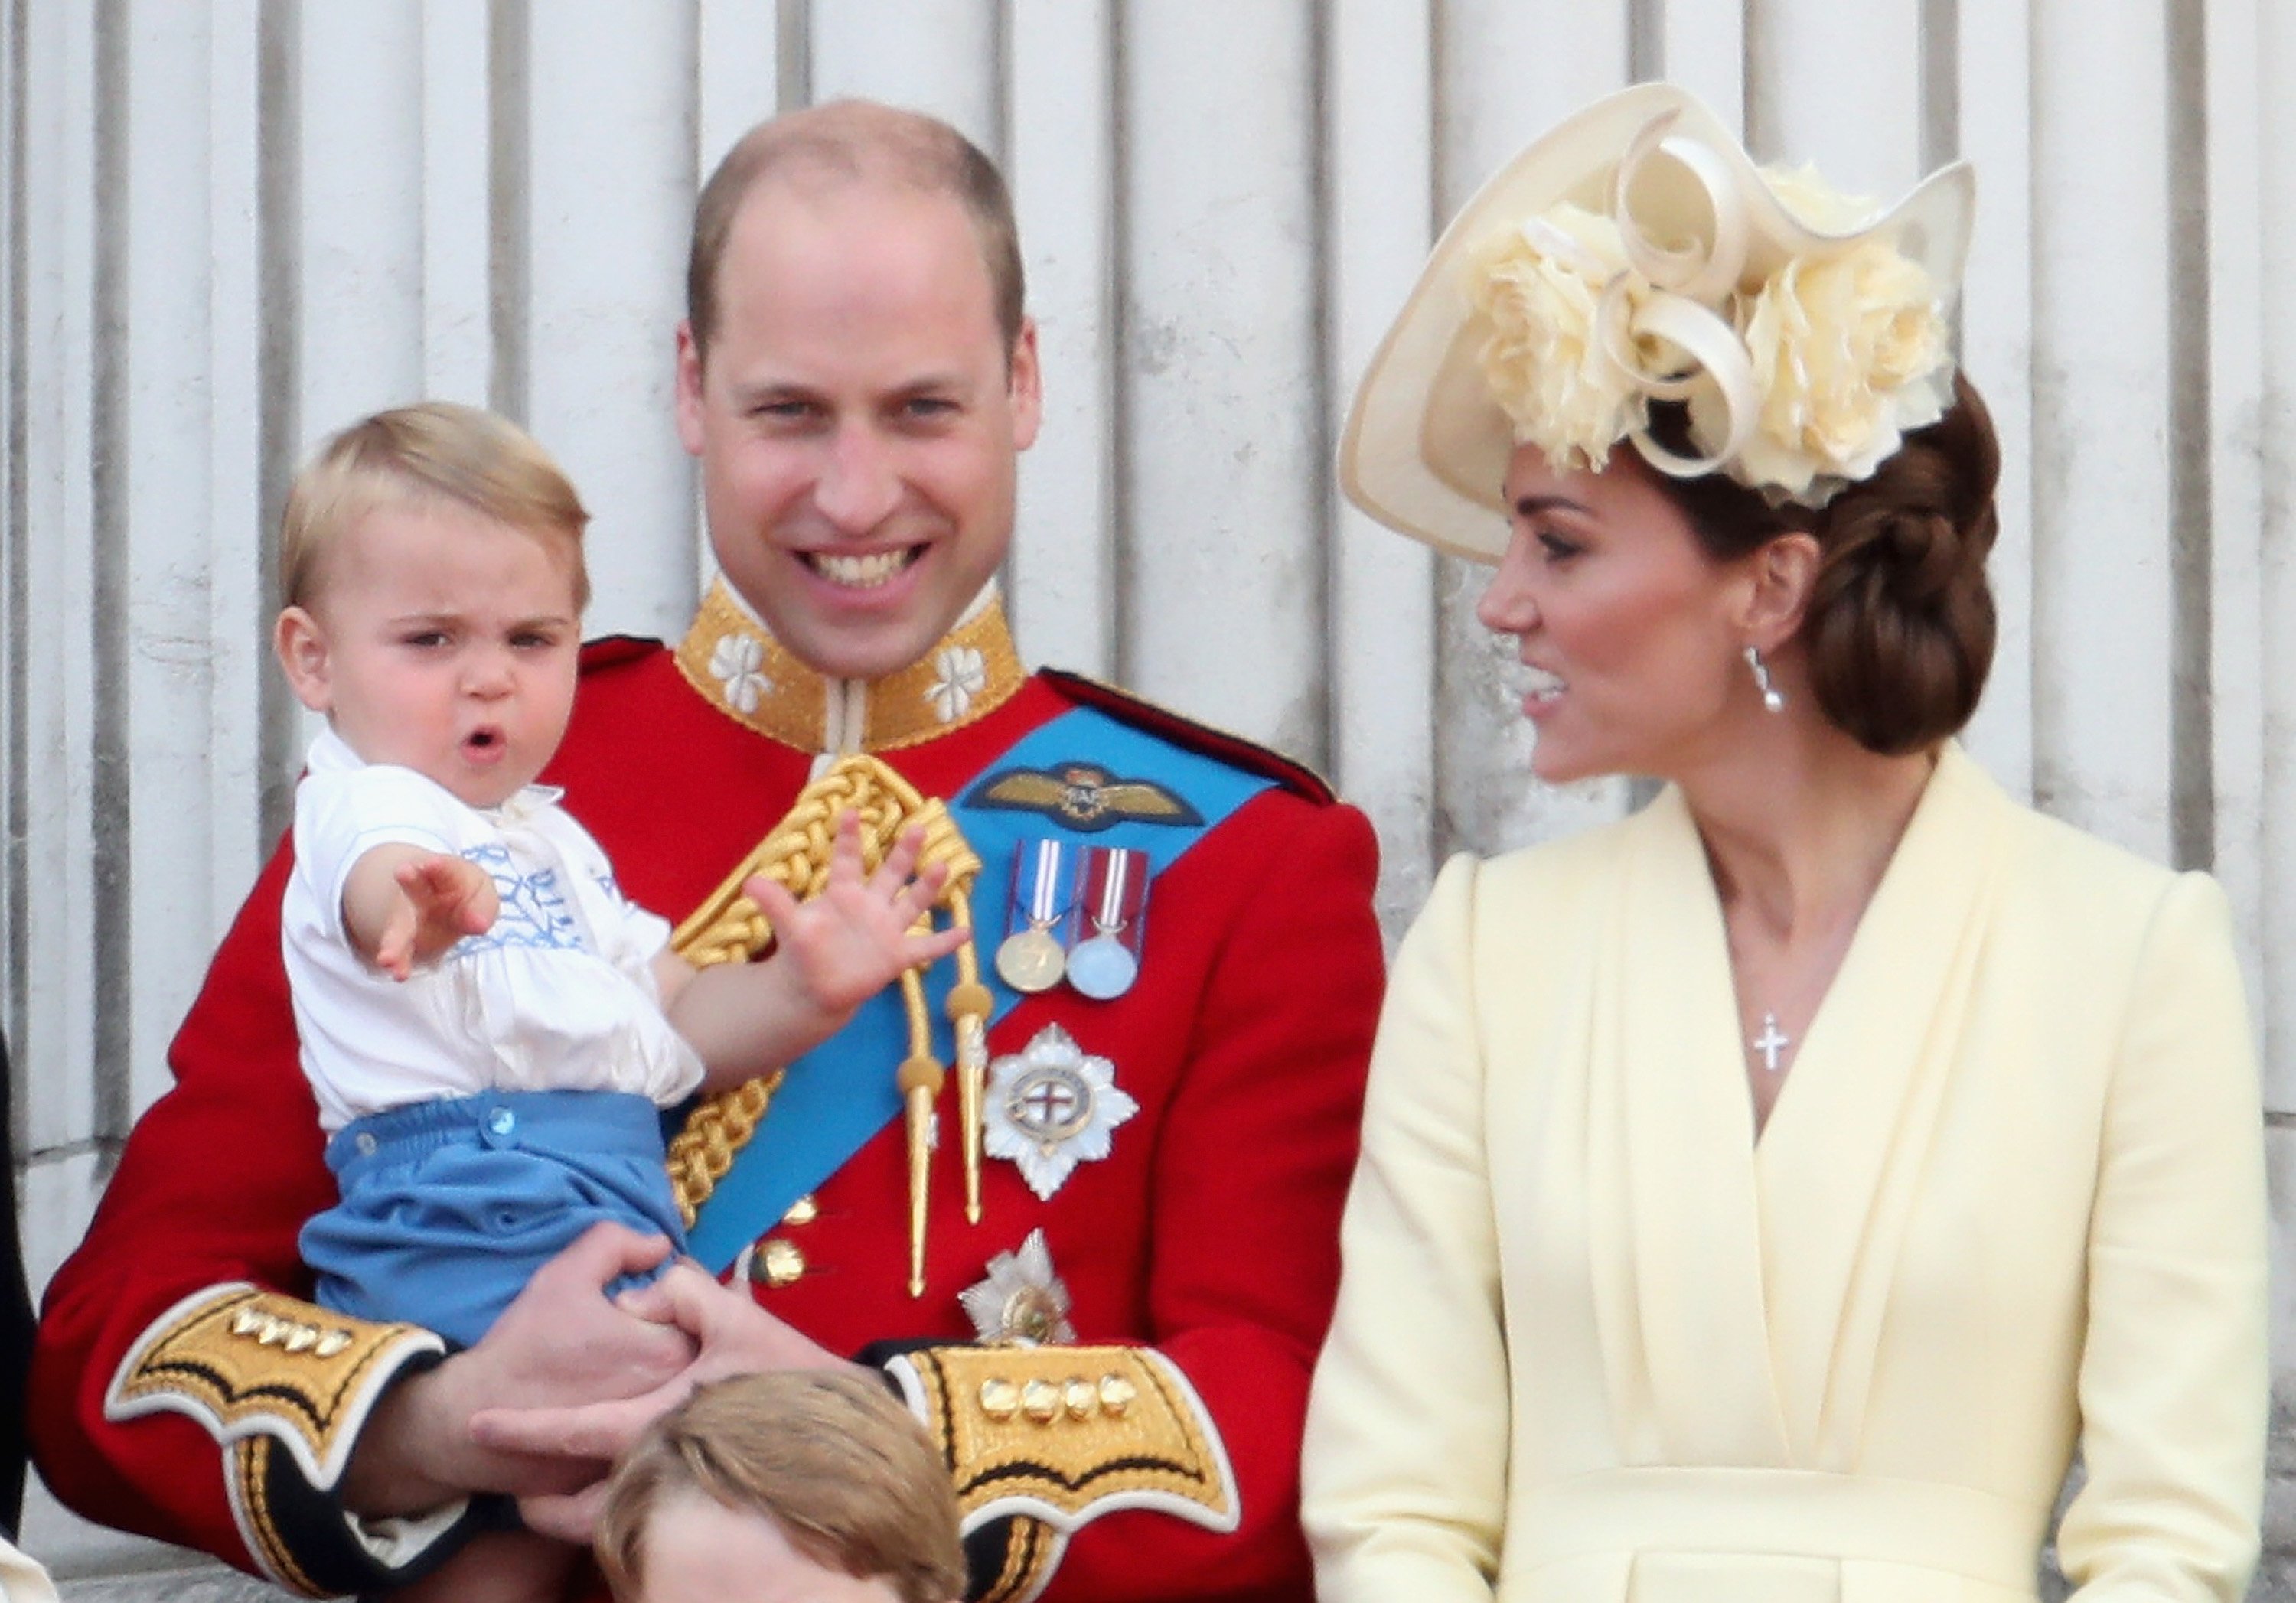 Prince Louis, Prince William, and Kate Middleton on the balcony during Trooping the Colour 2019